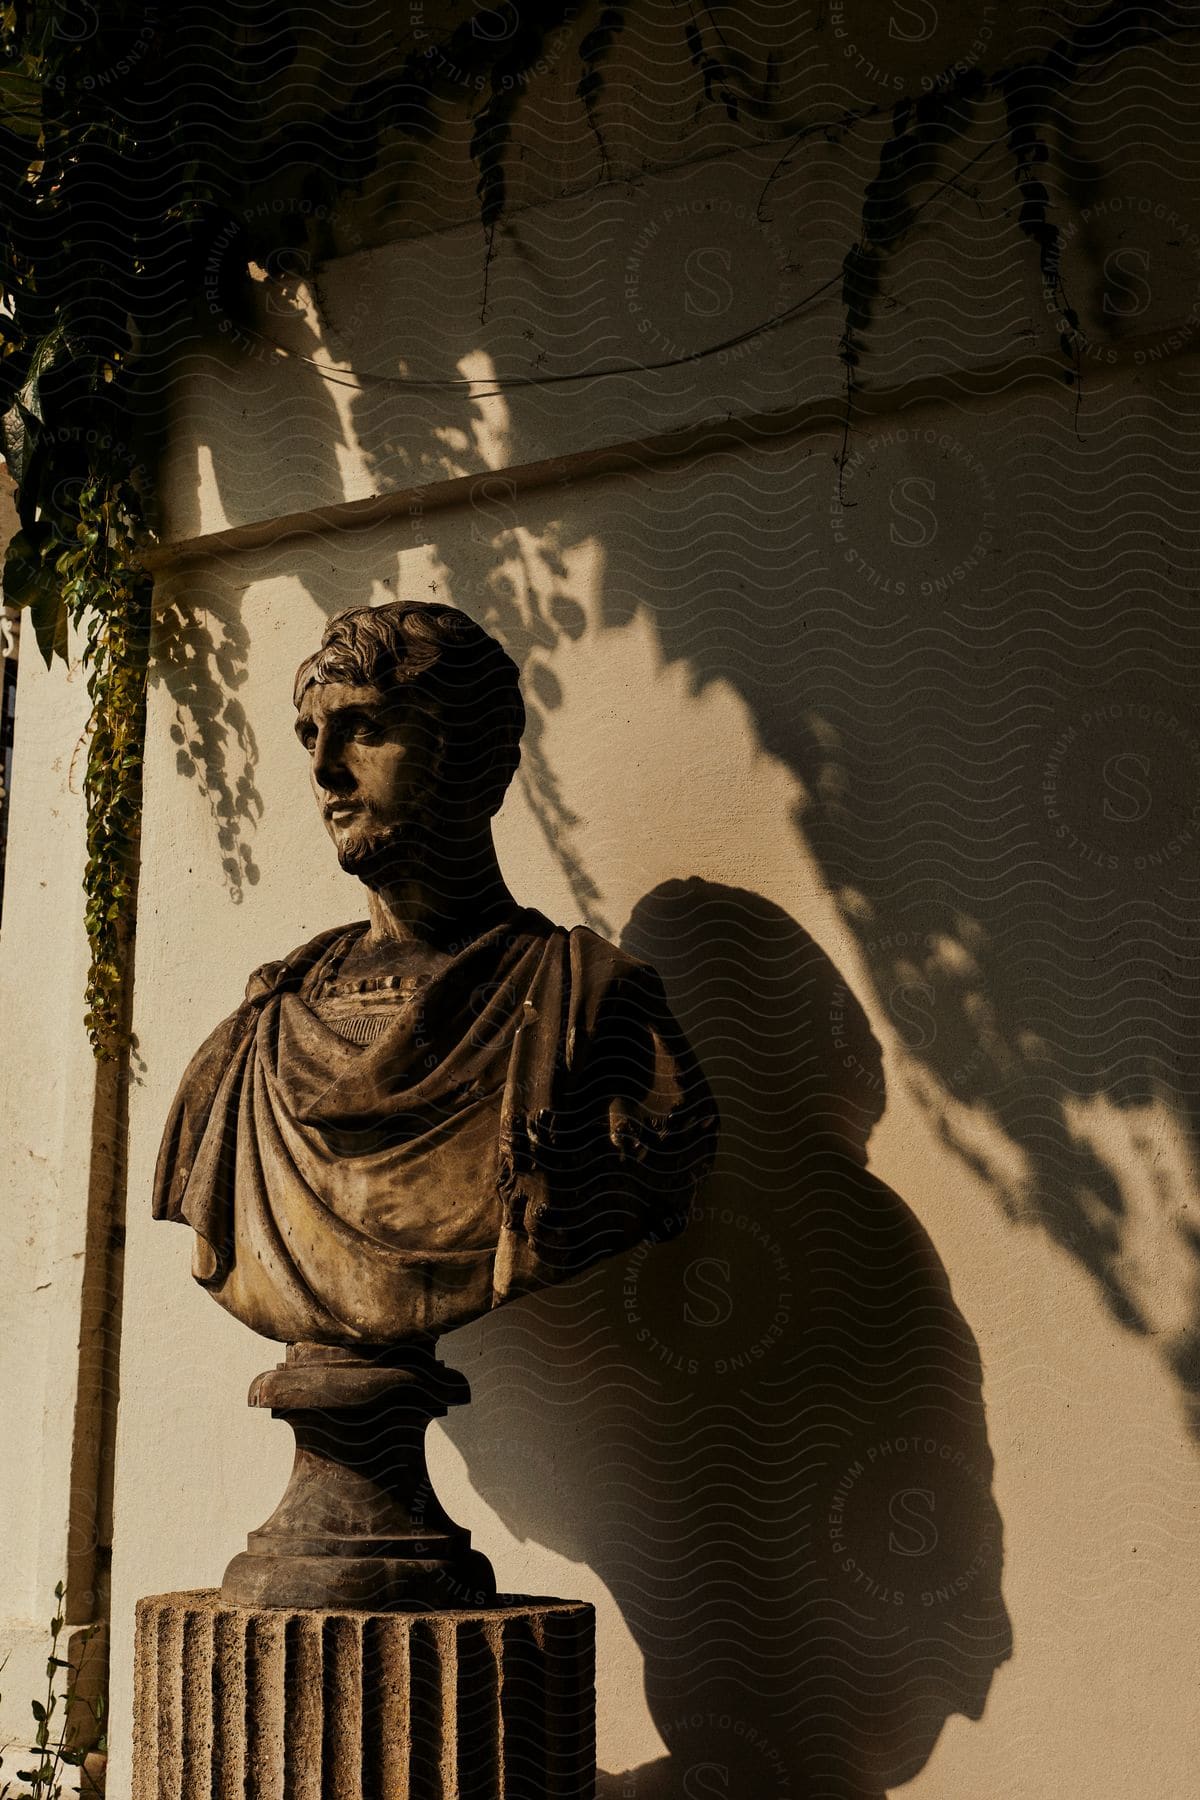 A weathered bust of an ancient Greek gazes out from a wall consumed by vibrant vines.